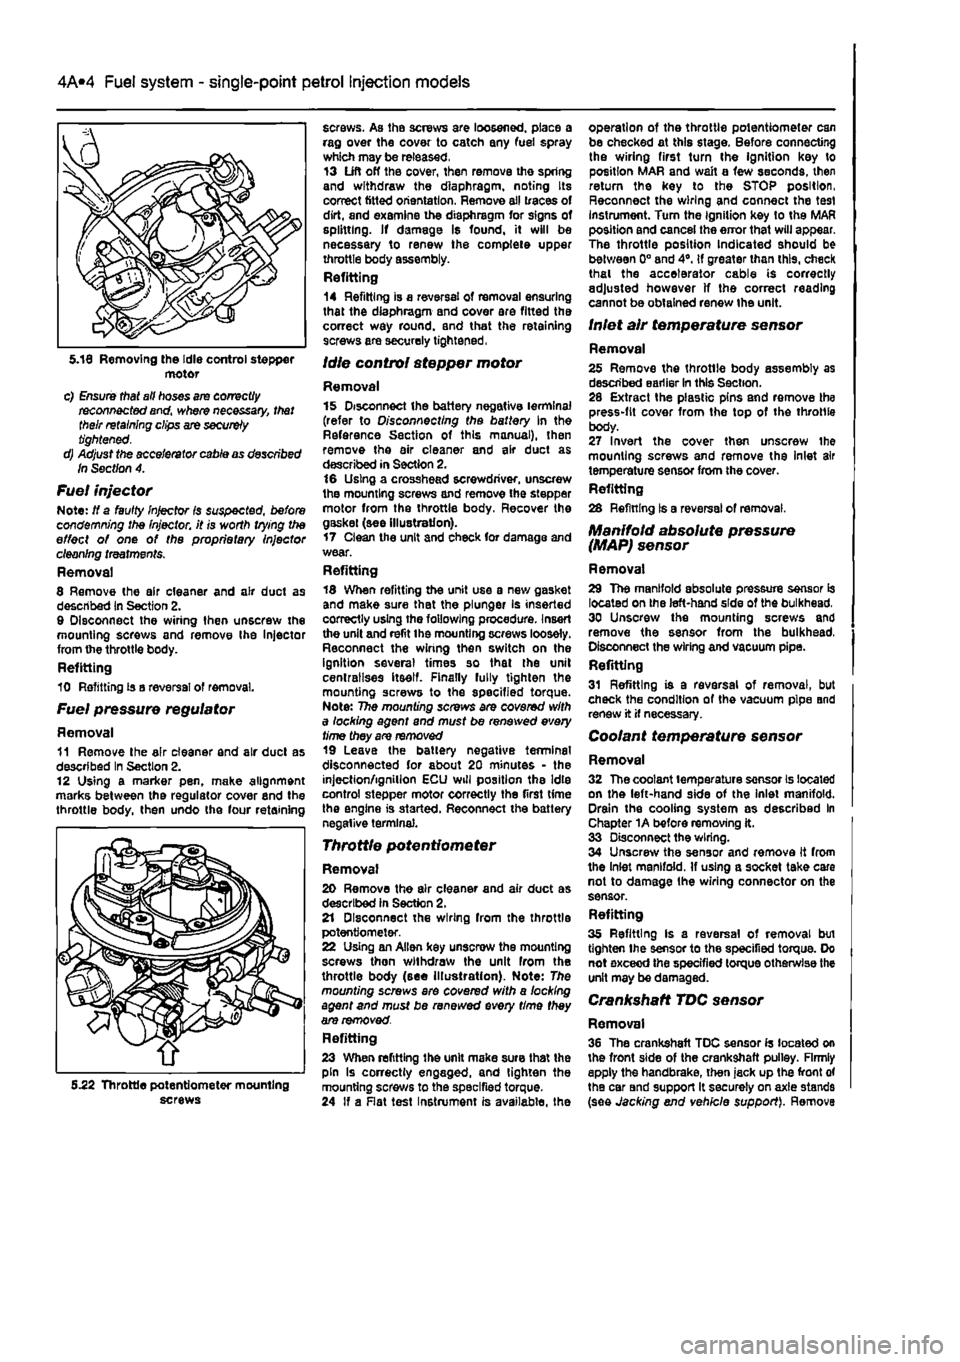 FIAT PUNTO 1998 176 / 1.G Workshop Manual 
4A*2 Fuel system - single-point petrol Injection models 
motor c) Ensure that all hoses are correctly reconnected and, where necessary, that their retaining clips are securely tightened. d) Adjust th